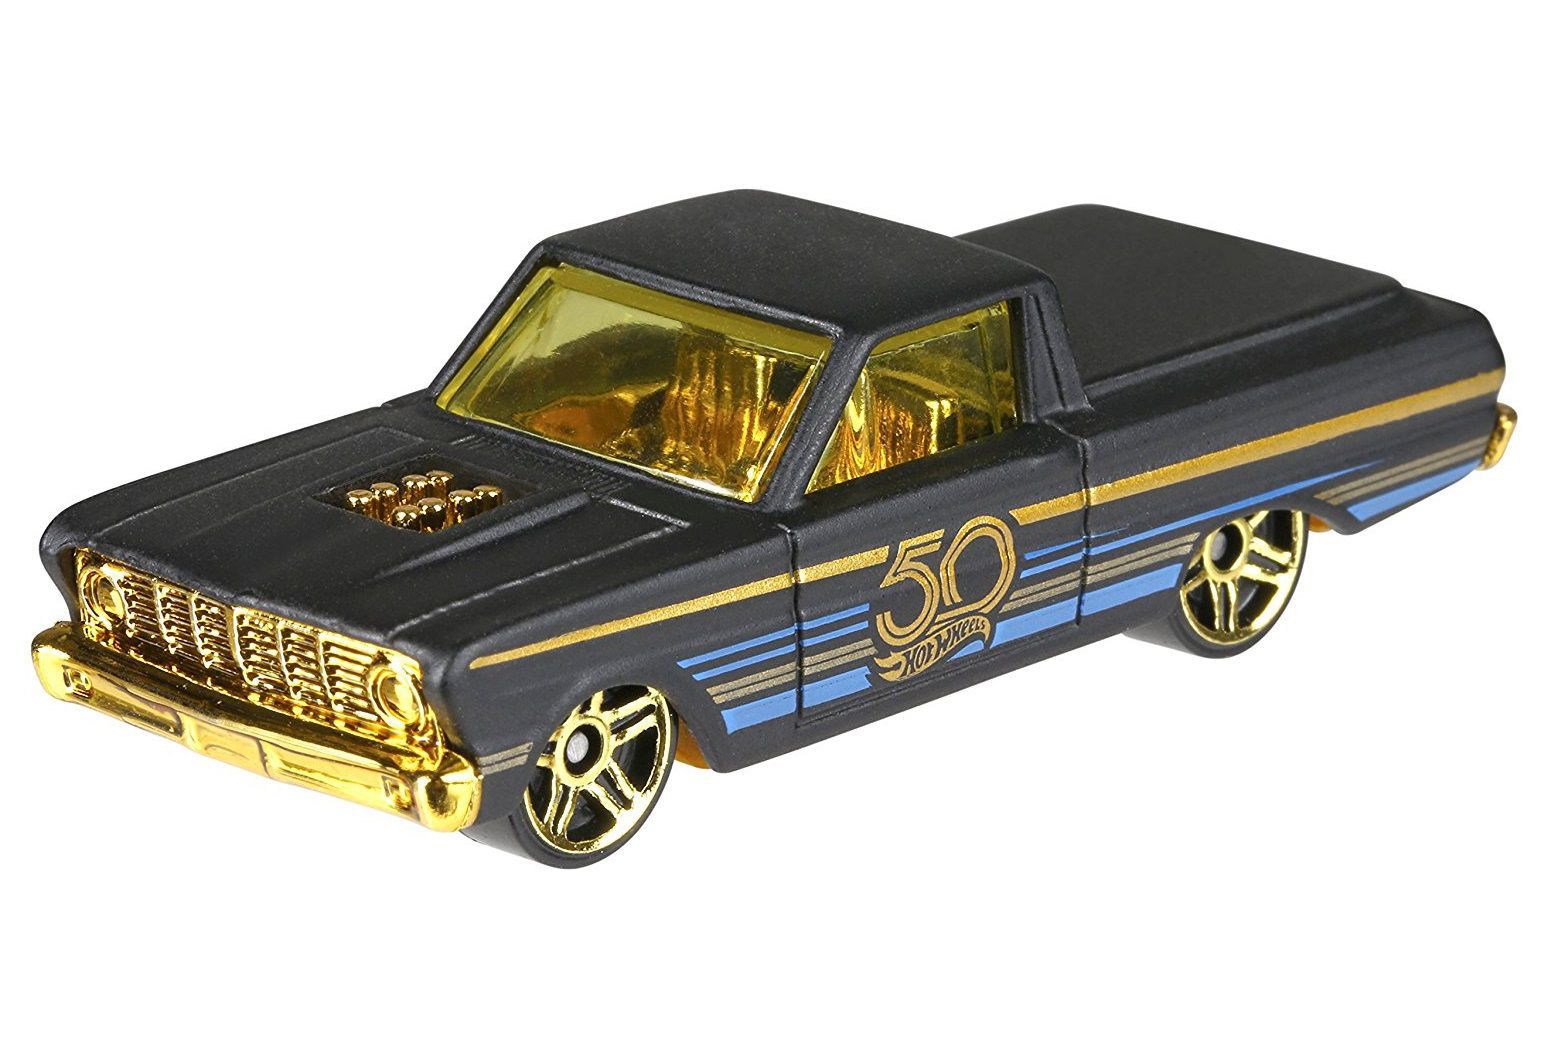 Hot Wheels 50th Anniversary Black Gold Edition Cars-Pack ...